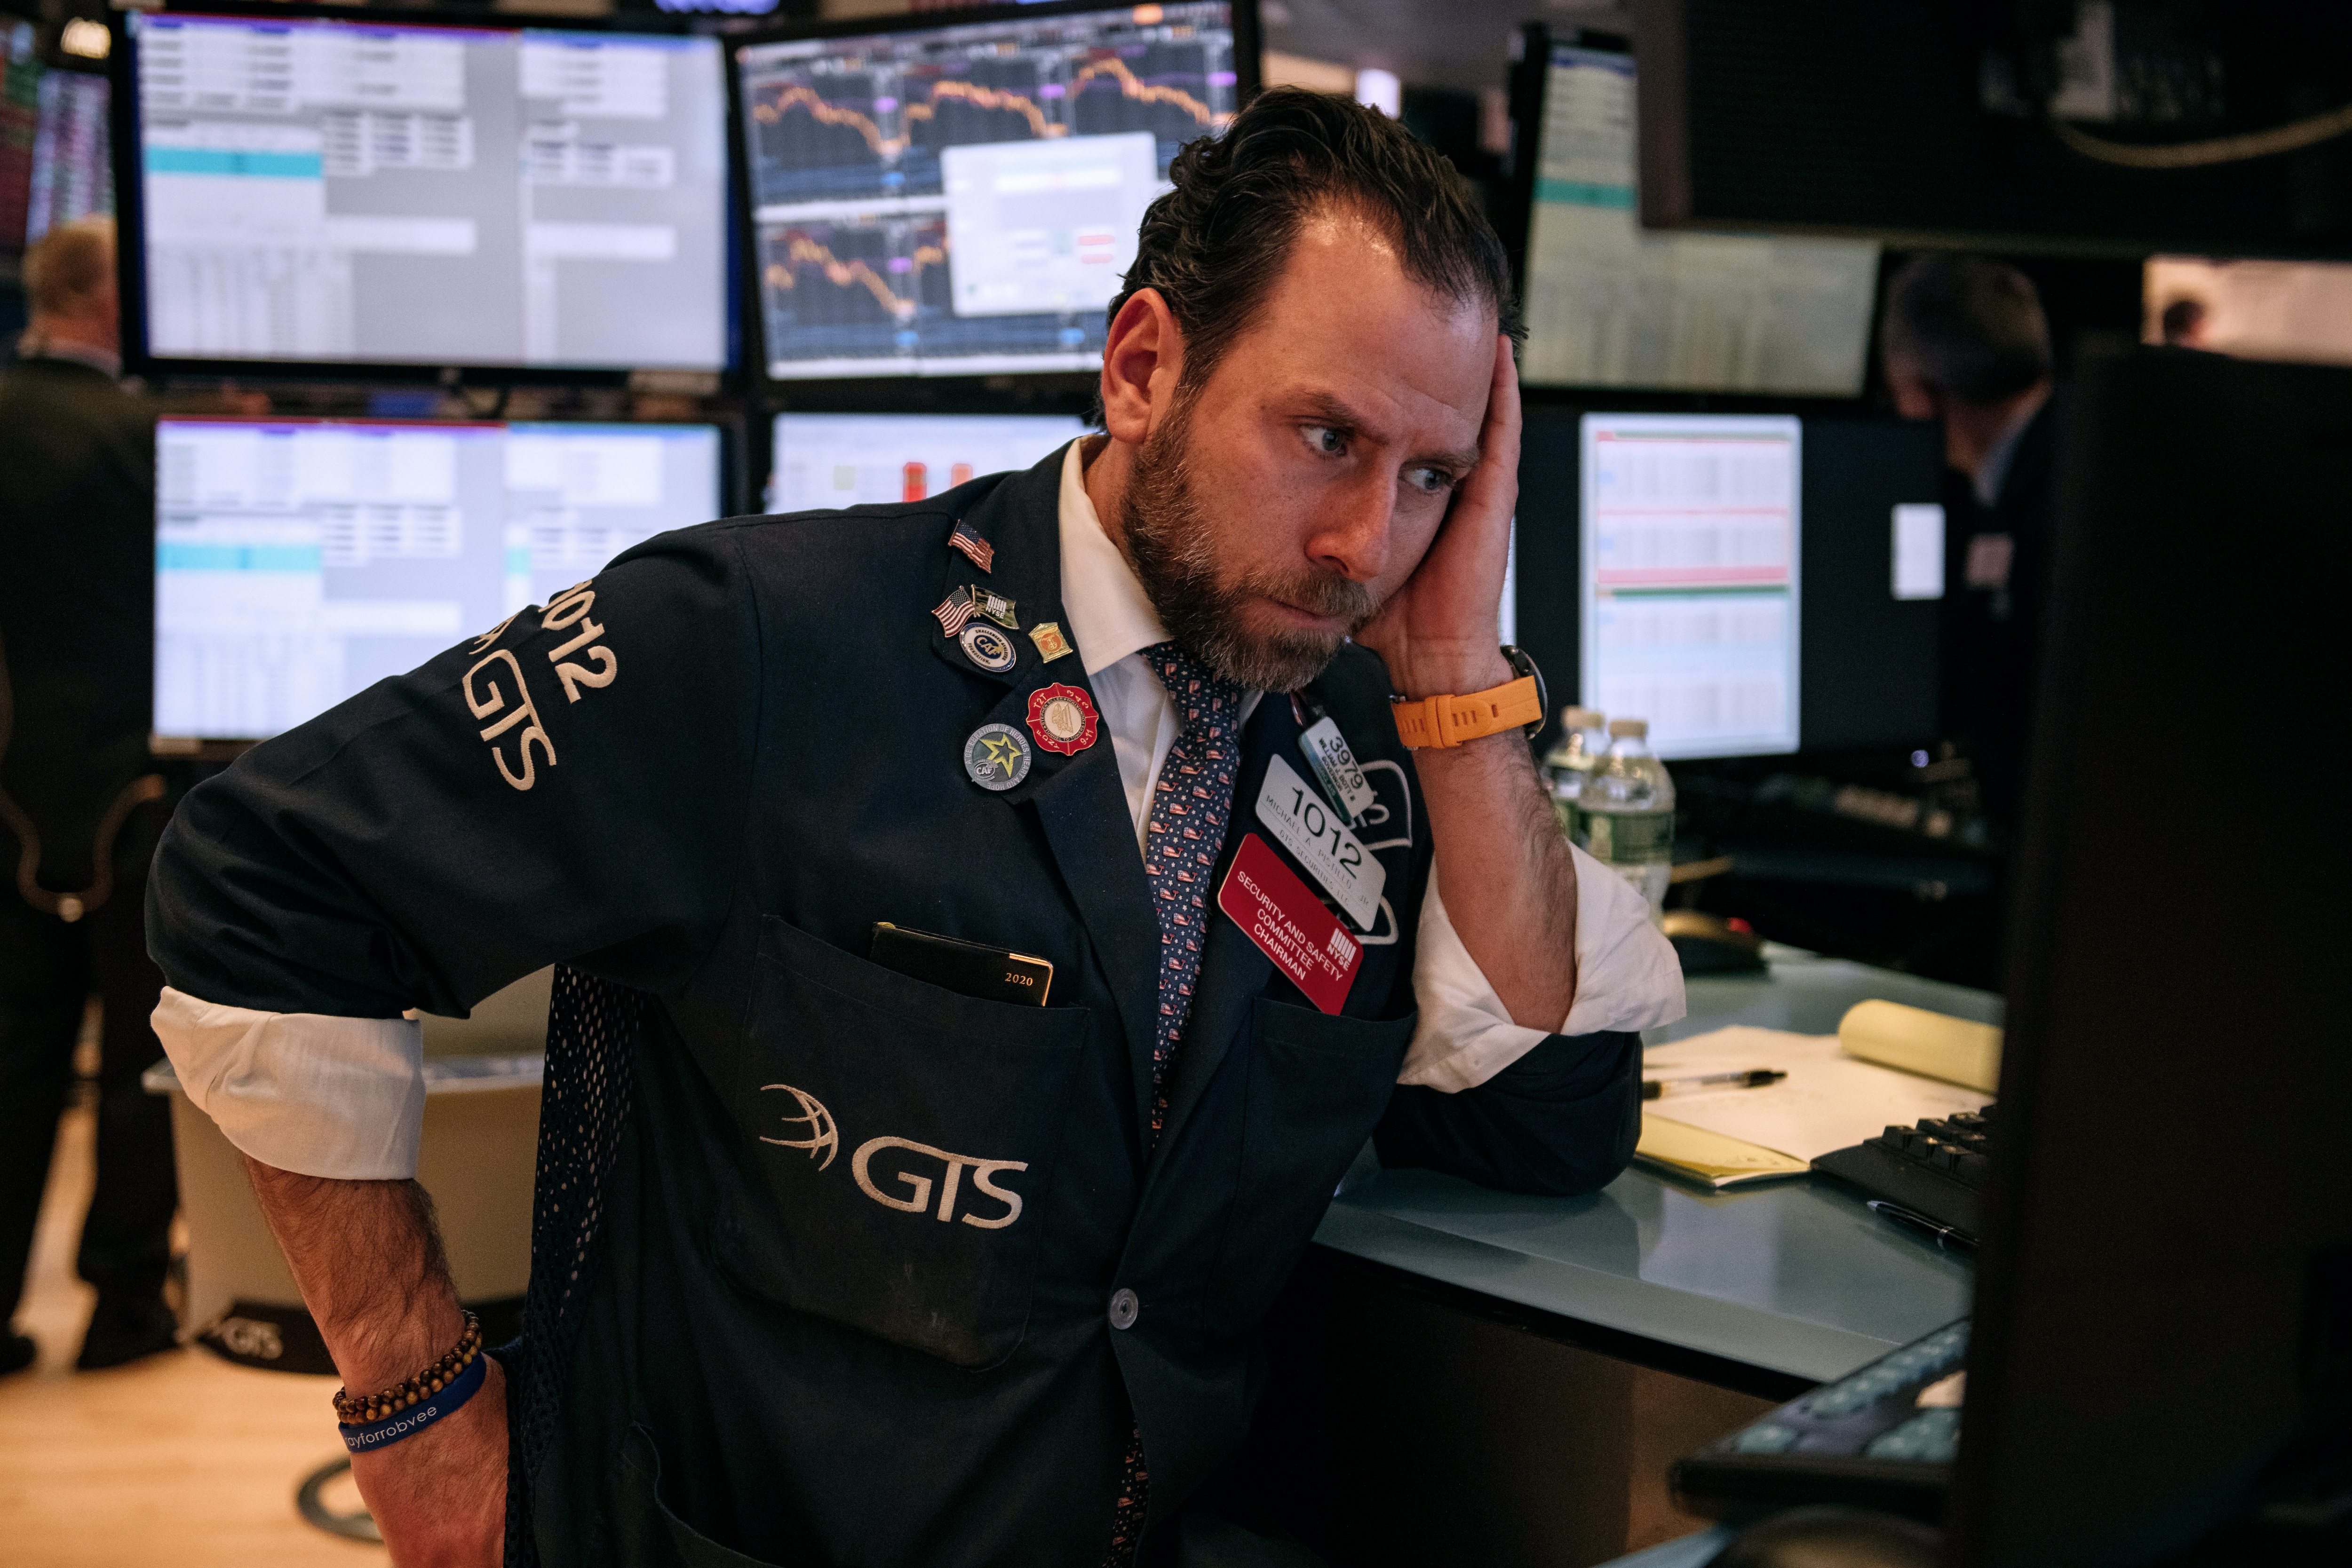 Traders on the floor of the New York Stock Exchange showed signs of panic.